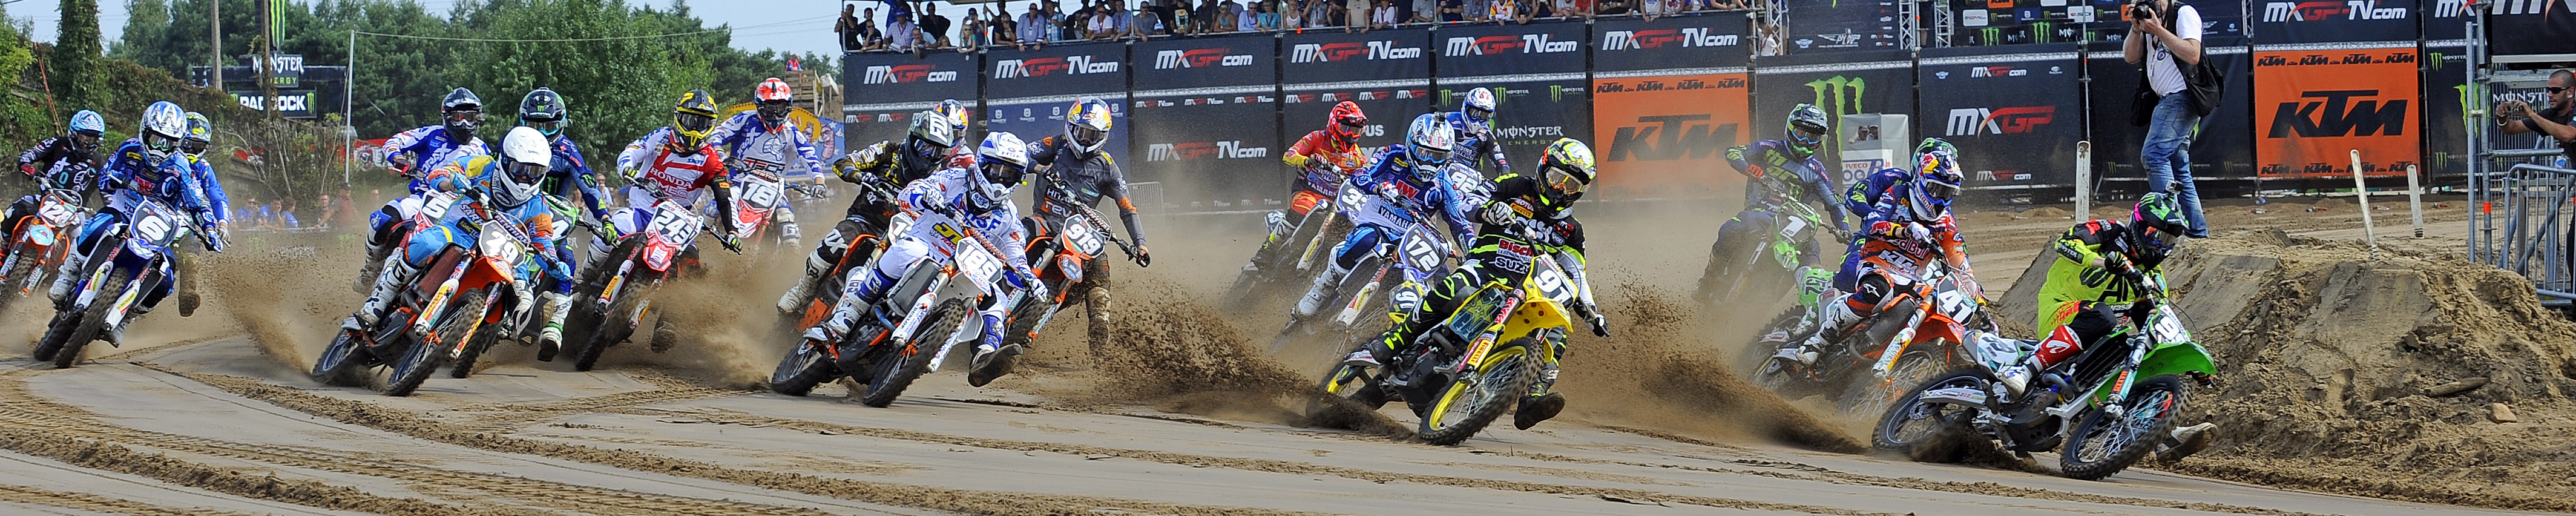 Anstie and Simpson continue domination of Maxxis at Blaxhall